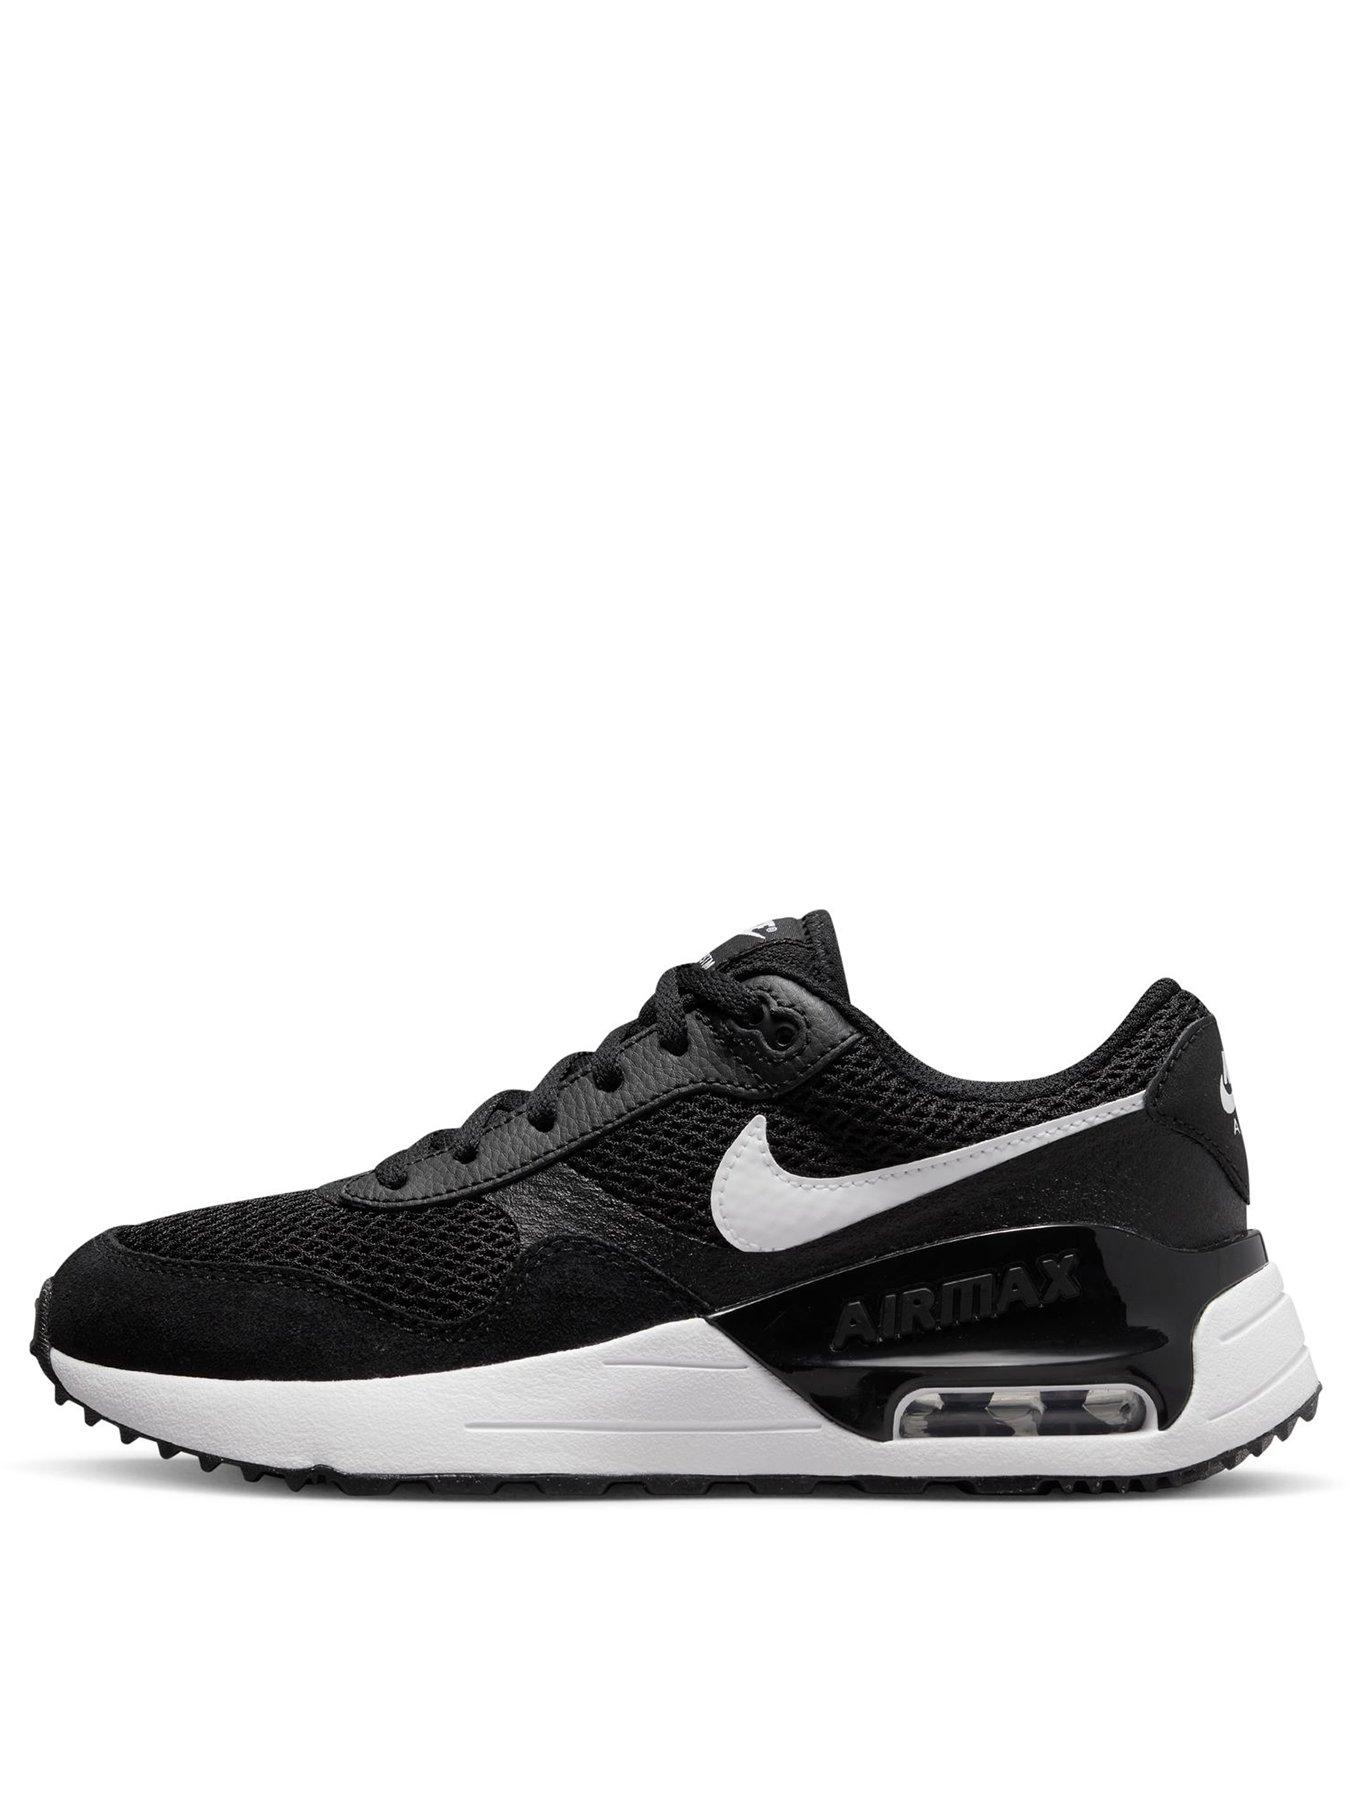 Nike Air Max SYSTM Junior Unisex Trainers - Black/White | very.co.uk